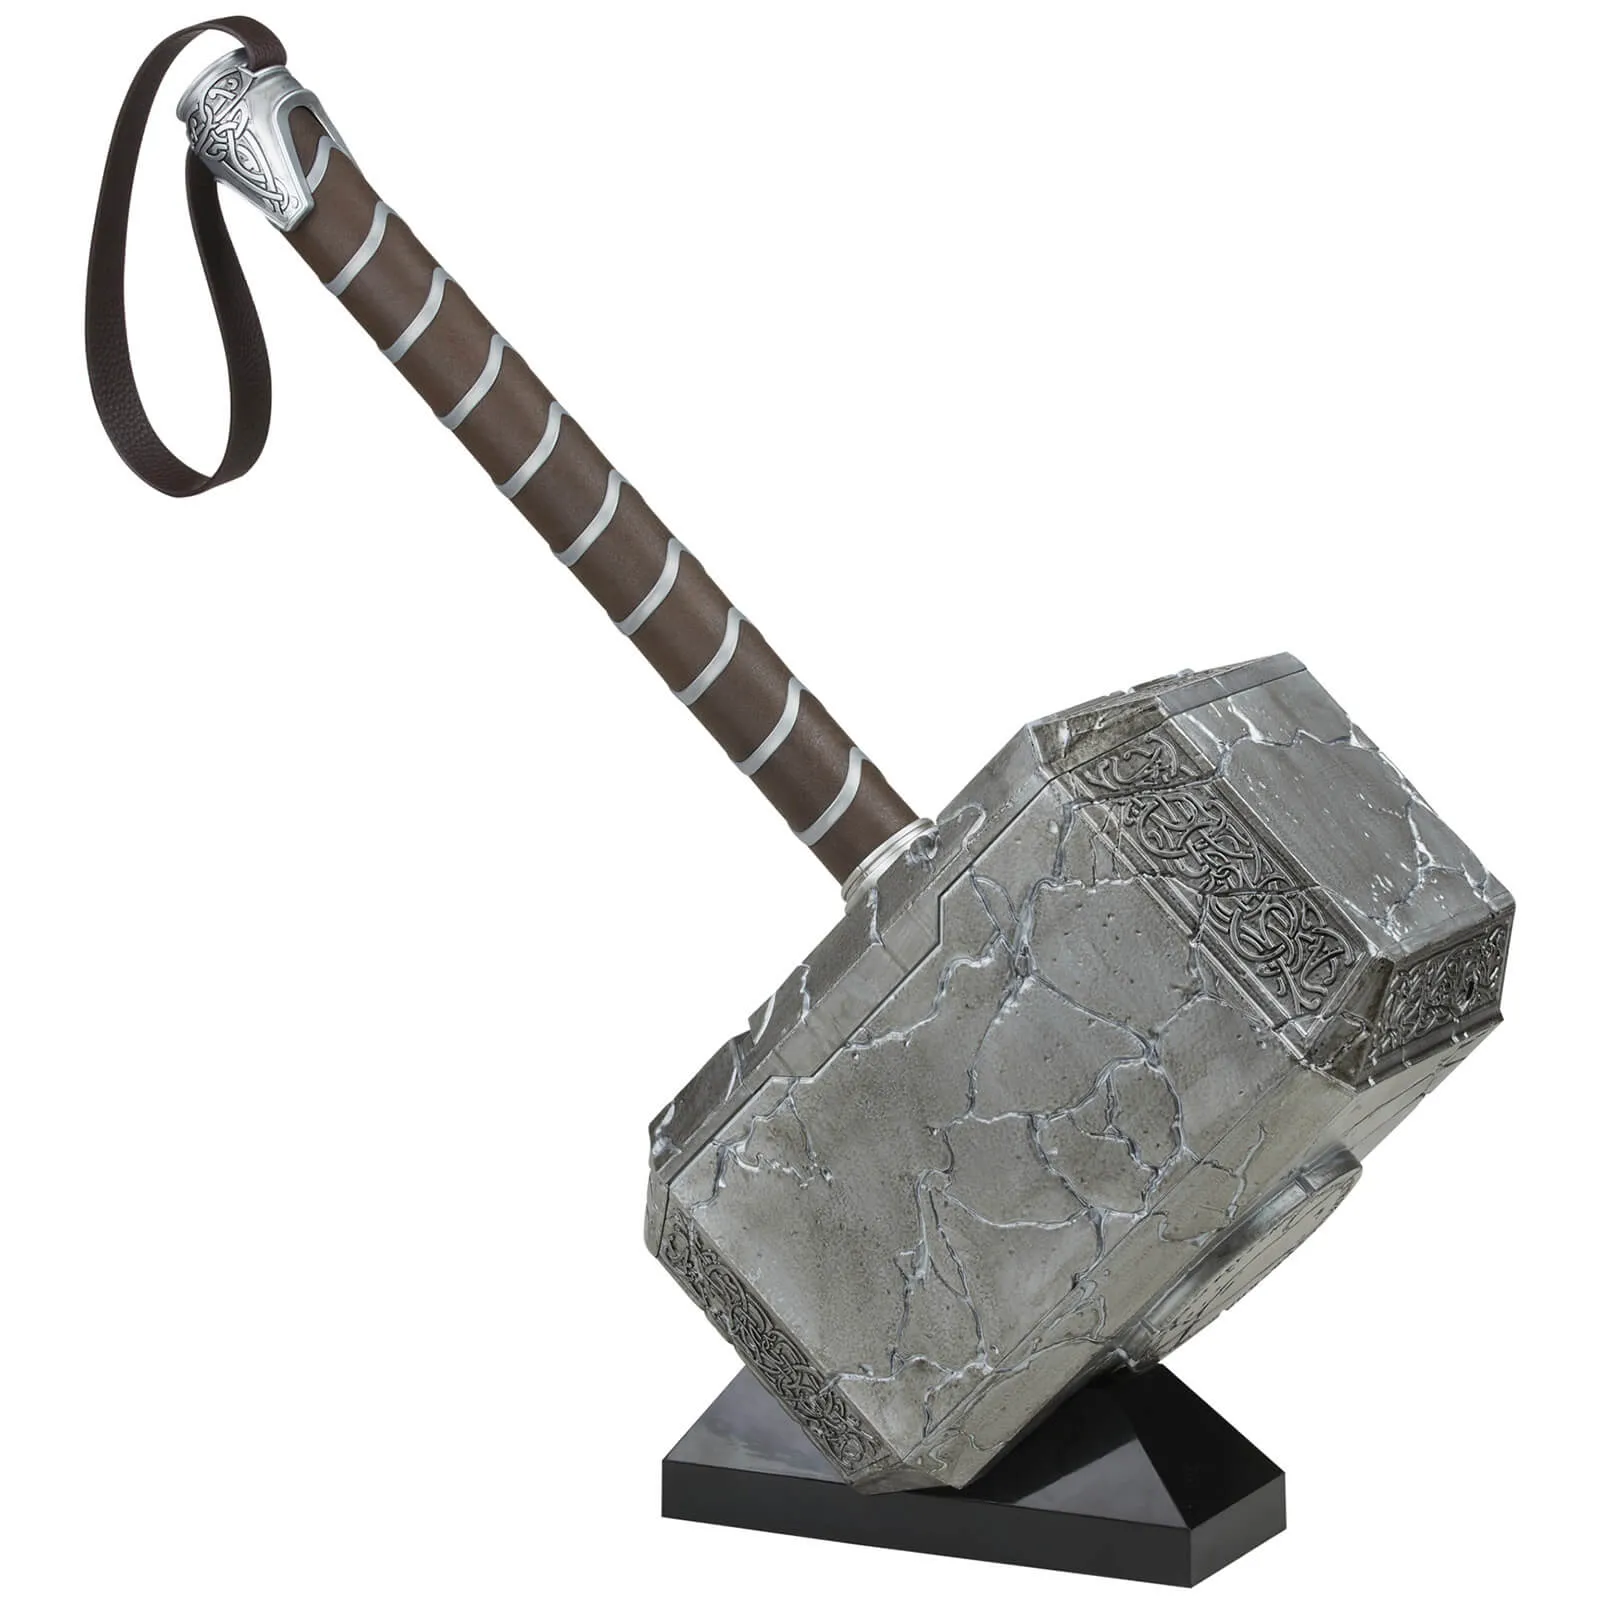  Marvel Legends Series Mighty Thor Mjolnir Premium Electronic Roleplay Hammer 1:1 Scale Replica